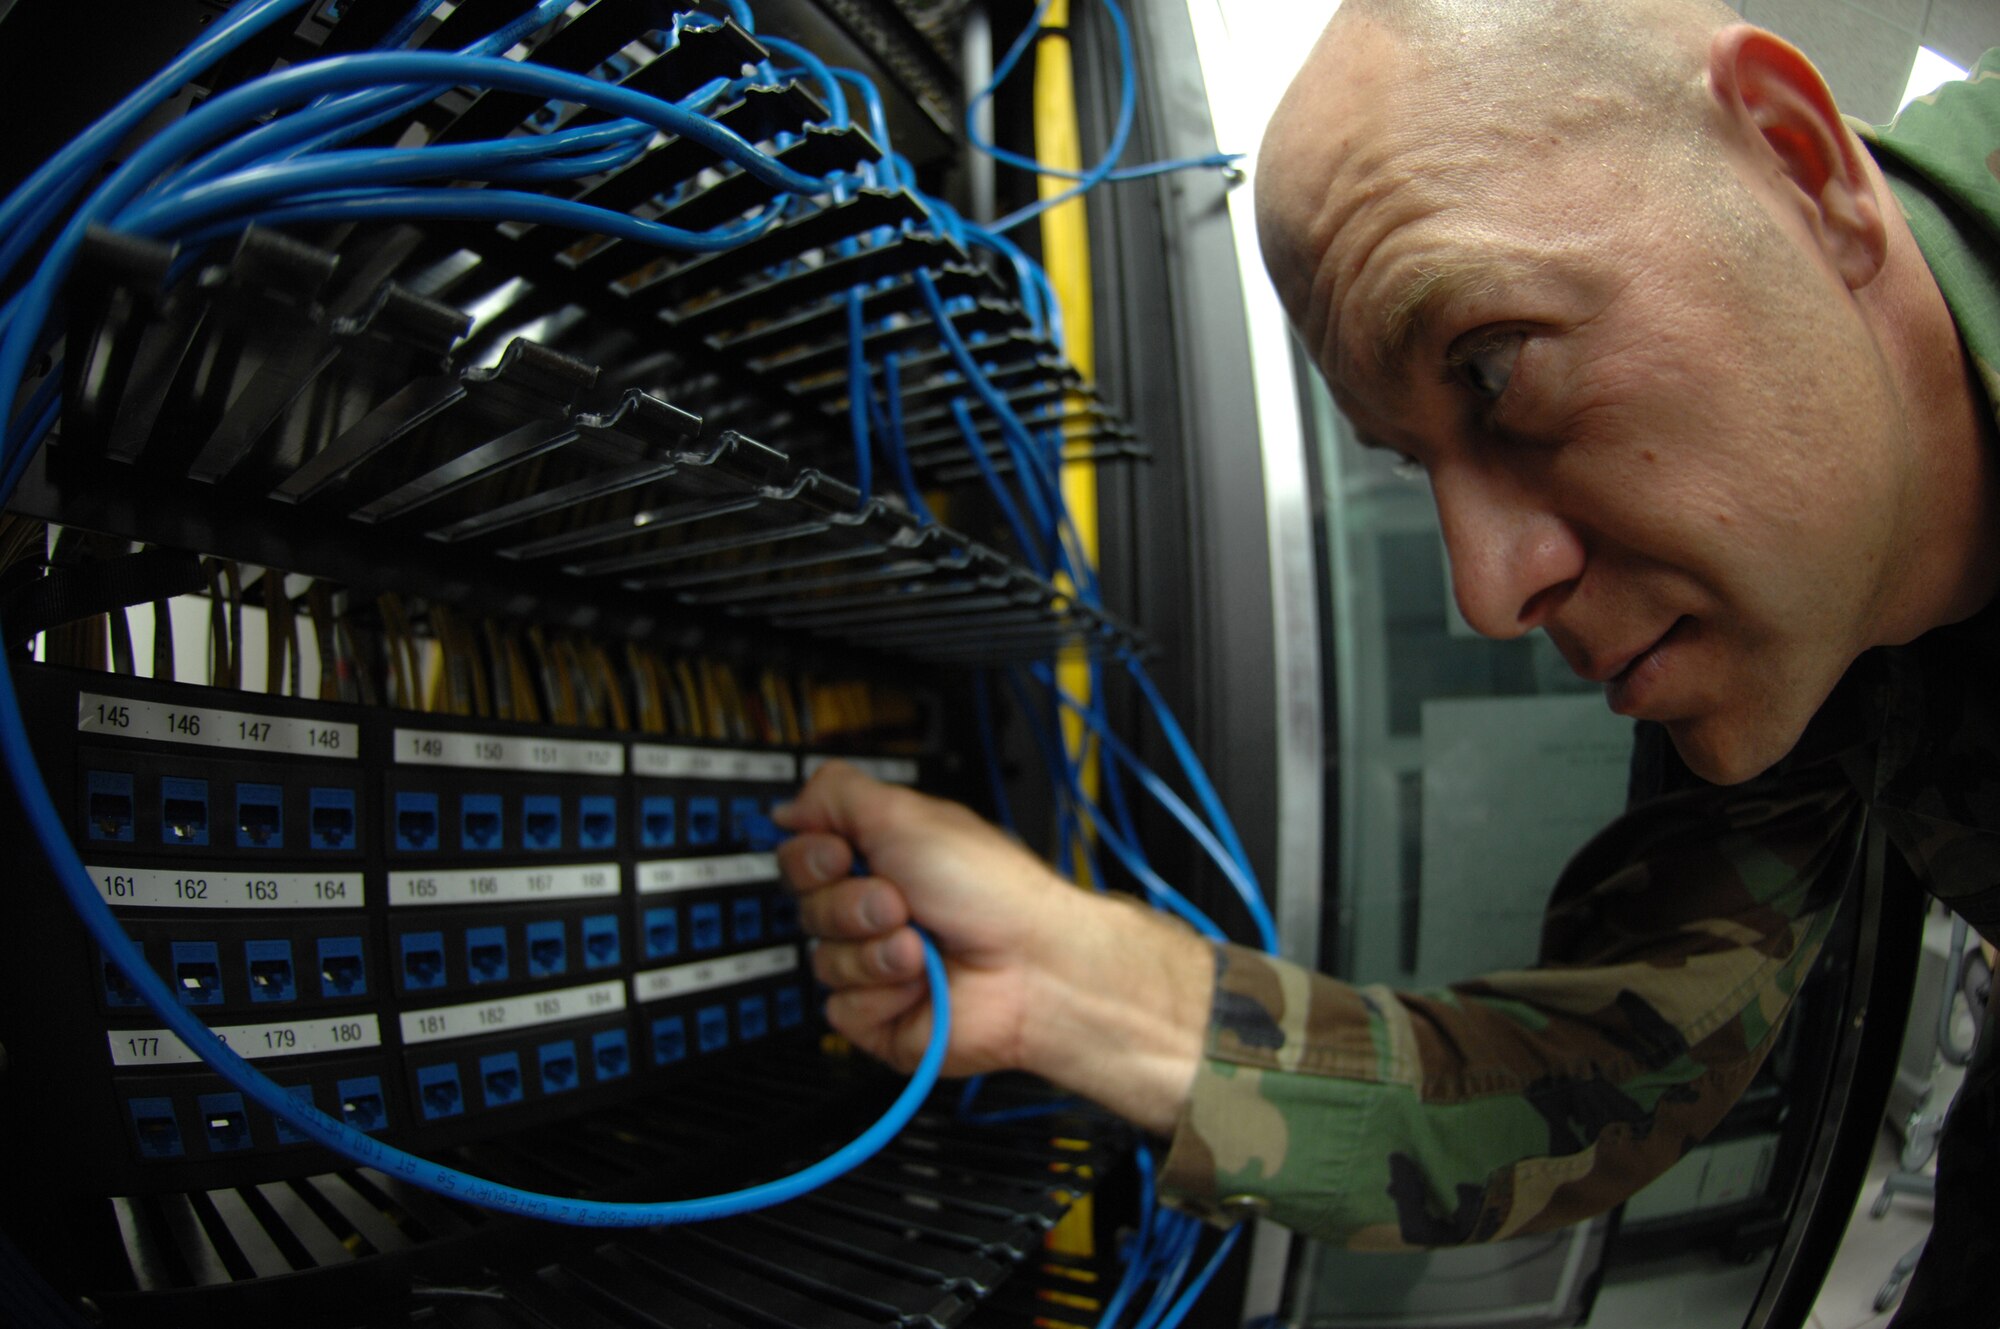 Staff Sergeant Eric Frazier, traces and organzies Cat-5 cable so it can be removed from the exsiting patch panel at Holloman Air Force Base, May 05. Sgt Frazier is assigned to the 49th Communications Squadron.
(U.S. Air Force photo/ Senior Airman Anthony Nelson Jr)  
